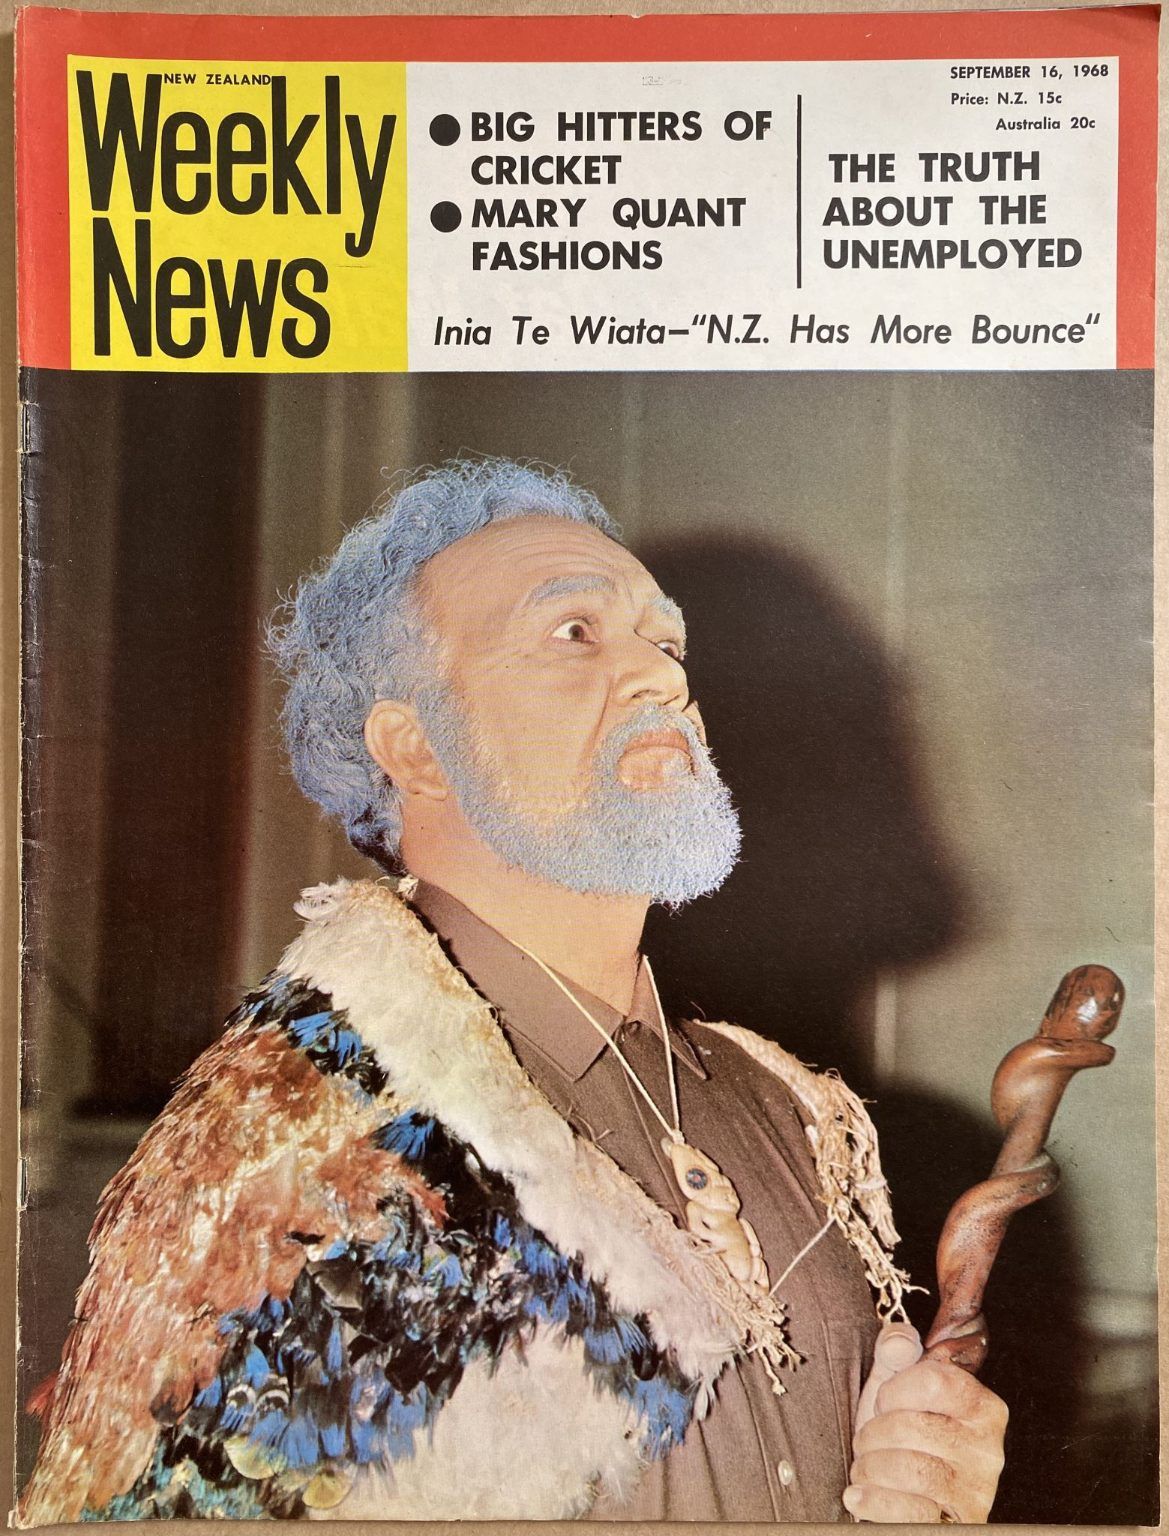 OLD NEWSPAPER: New Zealand Weekly News, 16 September 1968